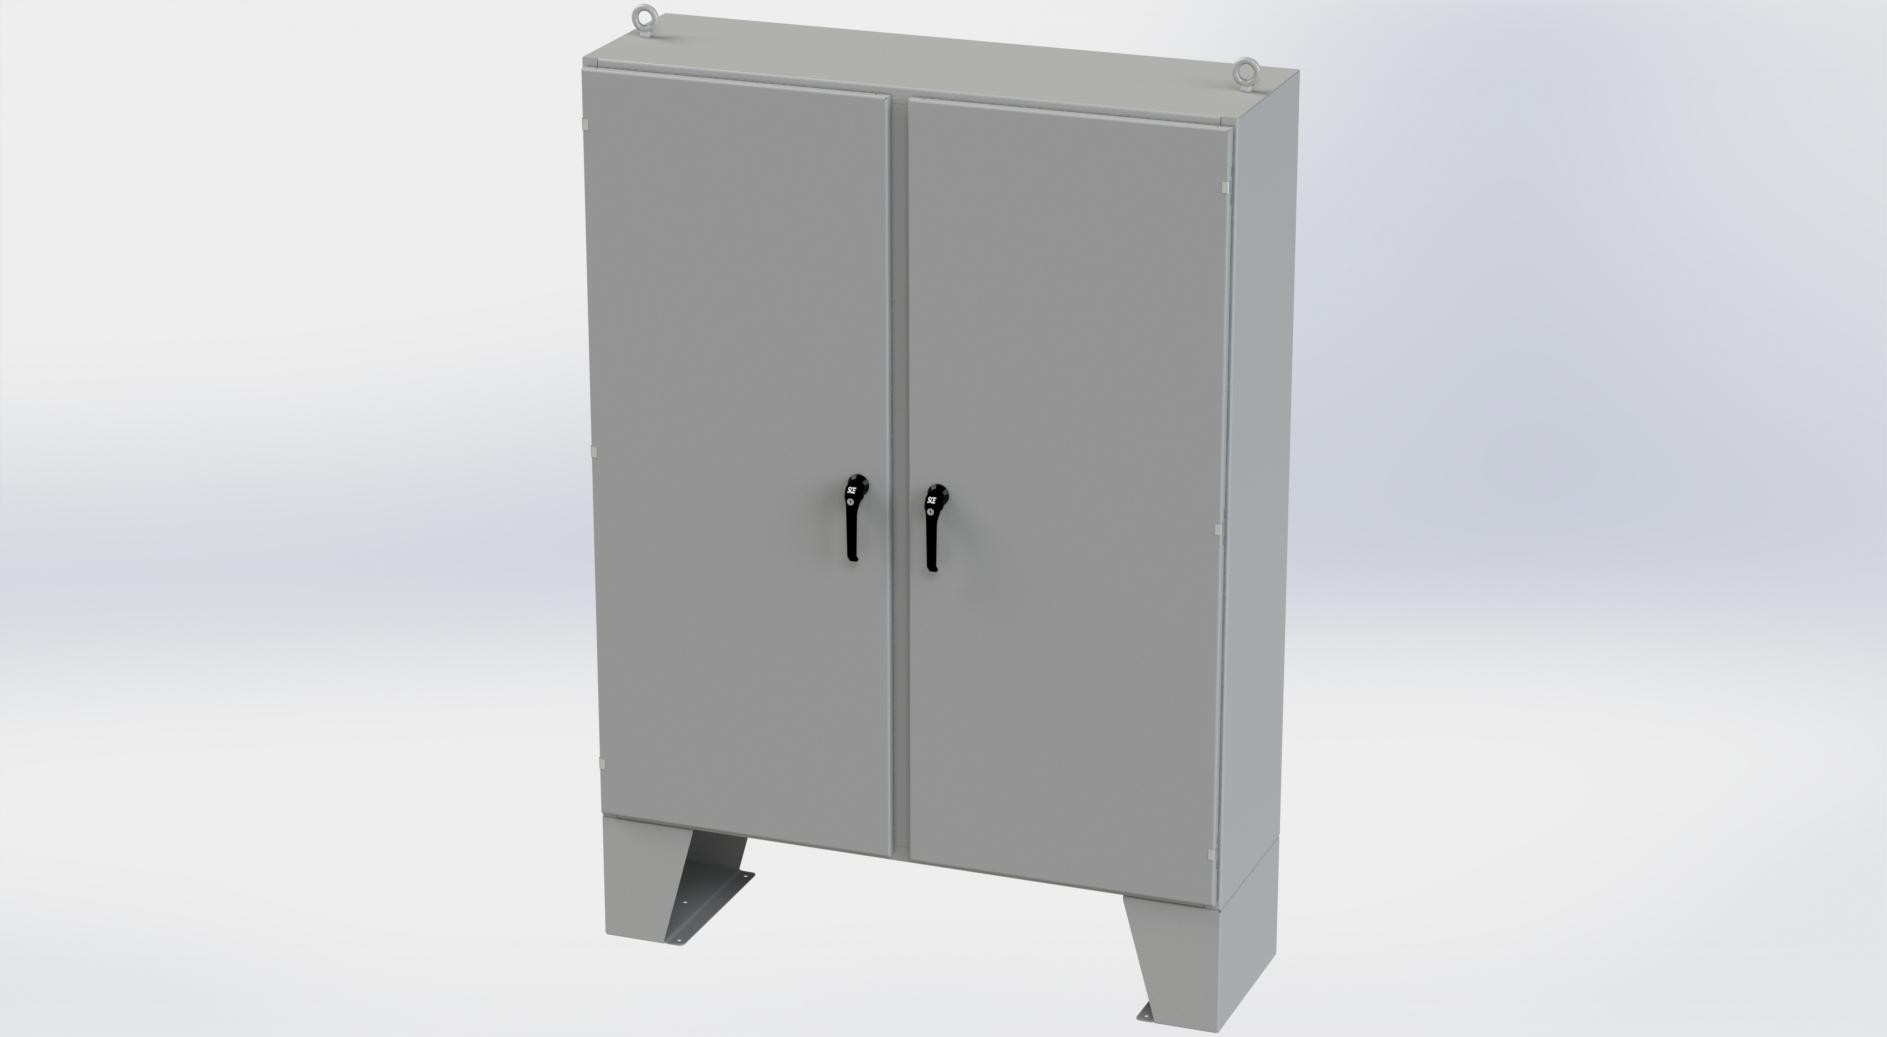 Saginaw Control SCE-72EL6018LPPL 2DR EL LPPL Enclosure, Height:72.00", Width:60.00", Depth:18.00", ANSI-61 gray powder coating inside and out. Optional sub-panels are powder coated white.